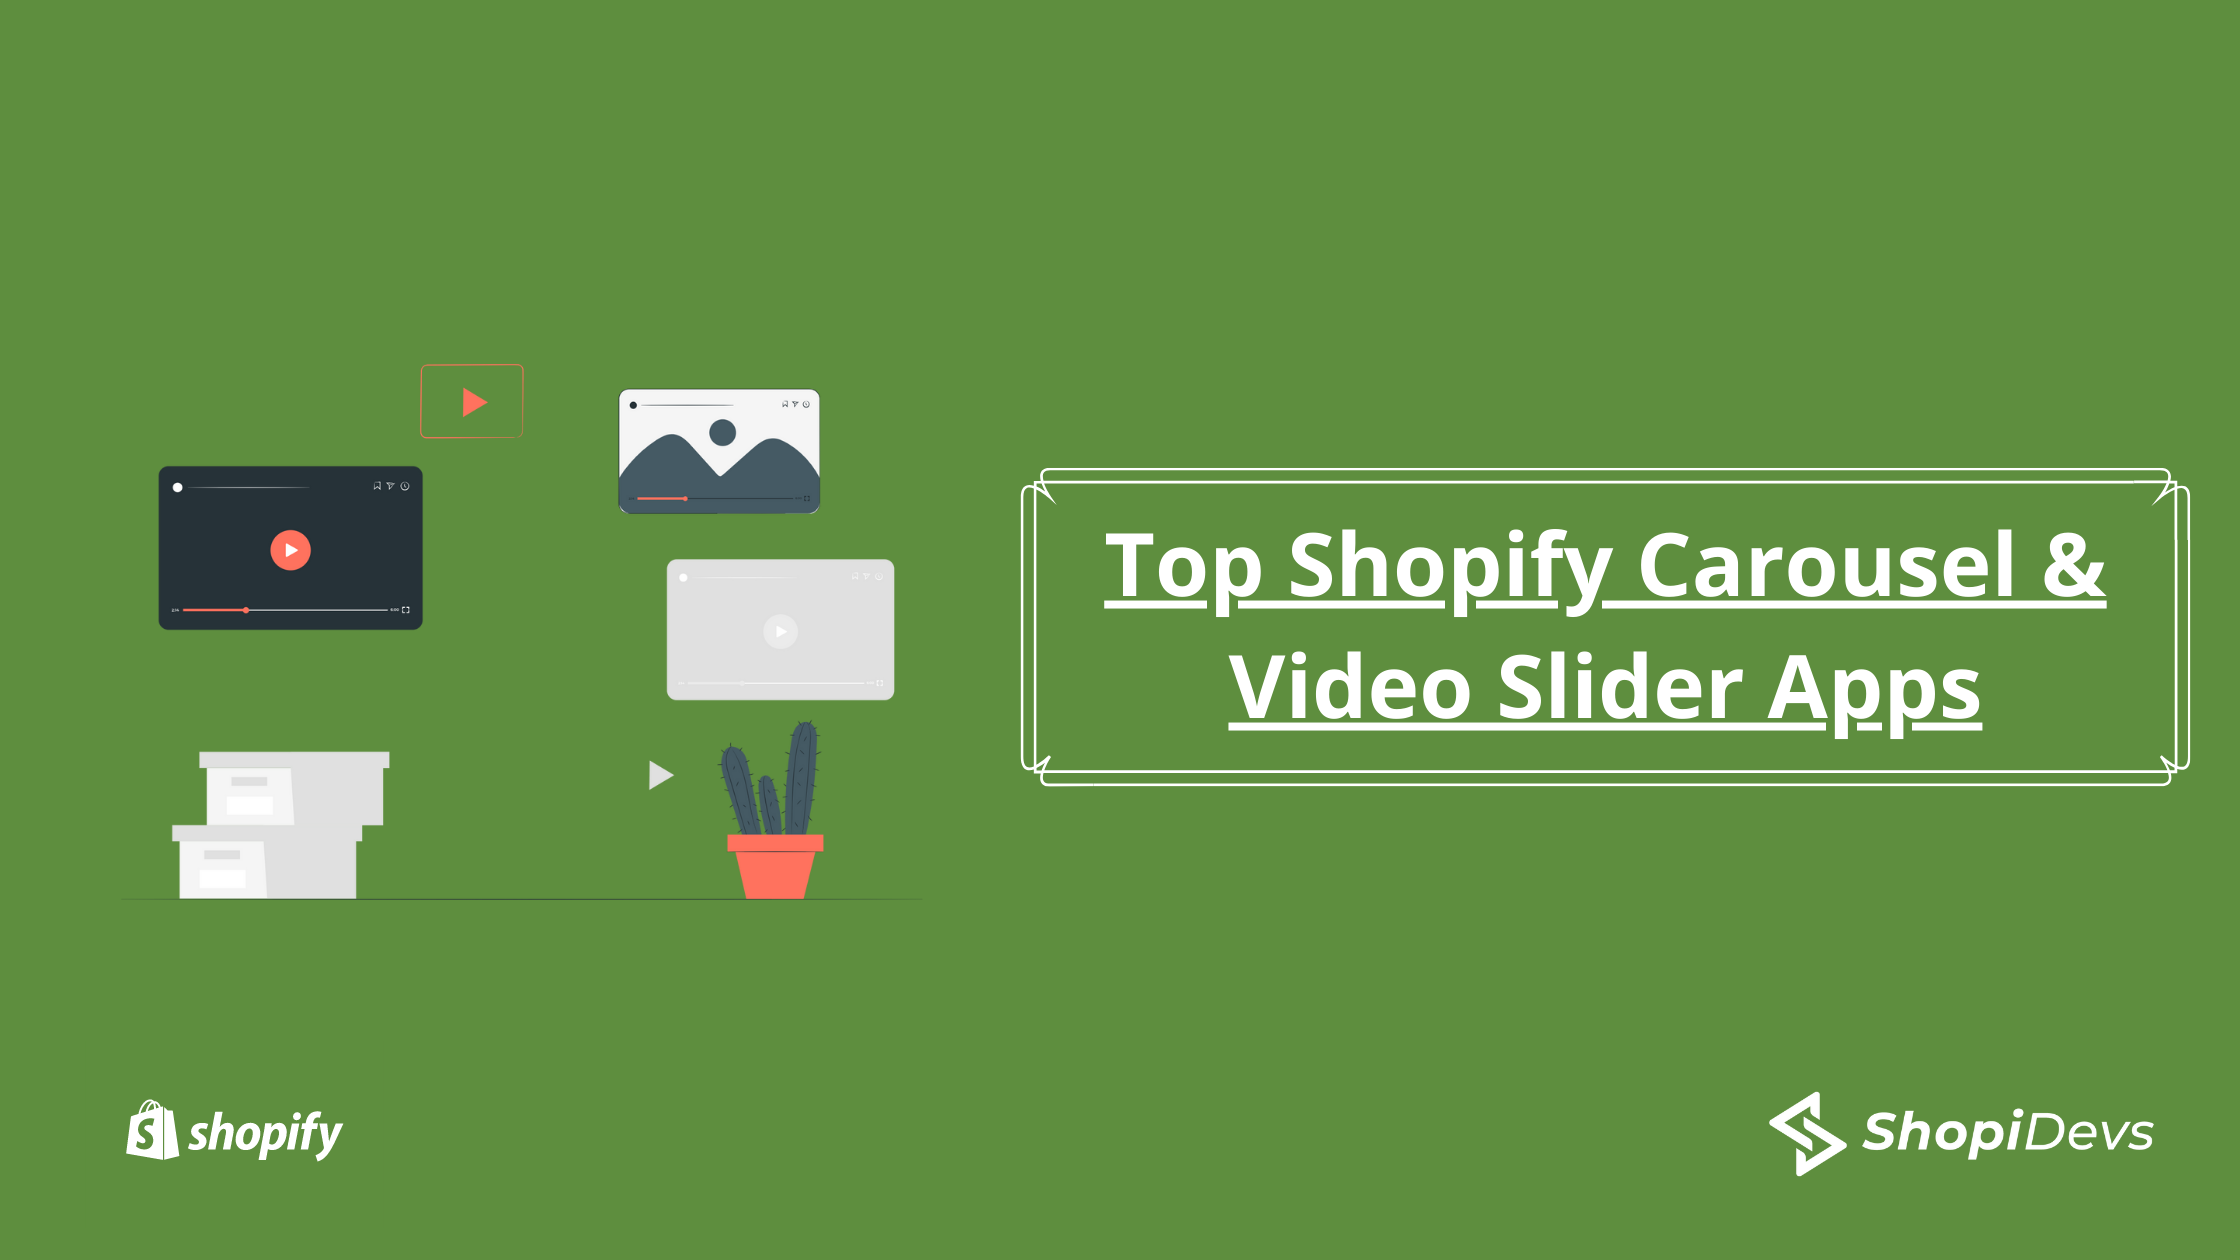 Top Shopify Carousel & Video Slider Apps